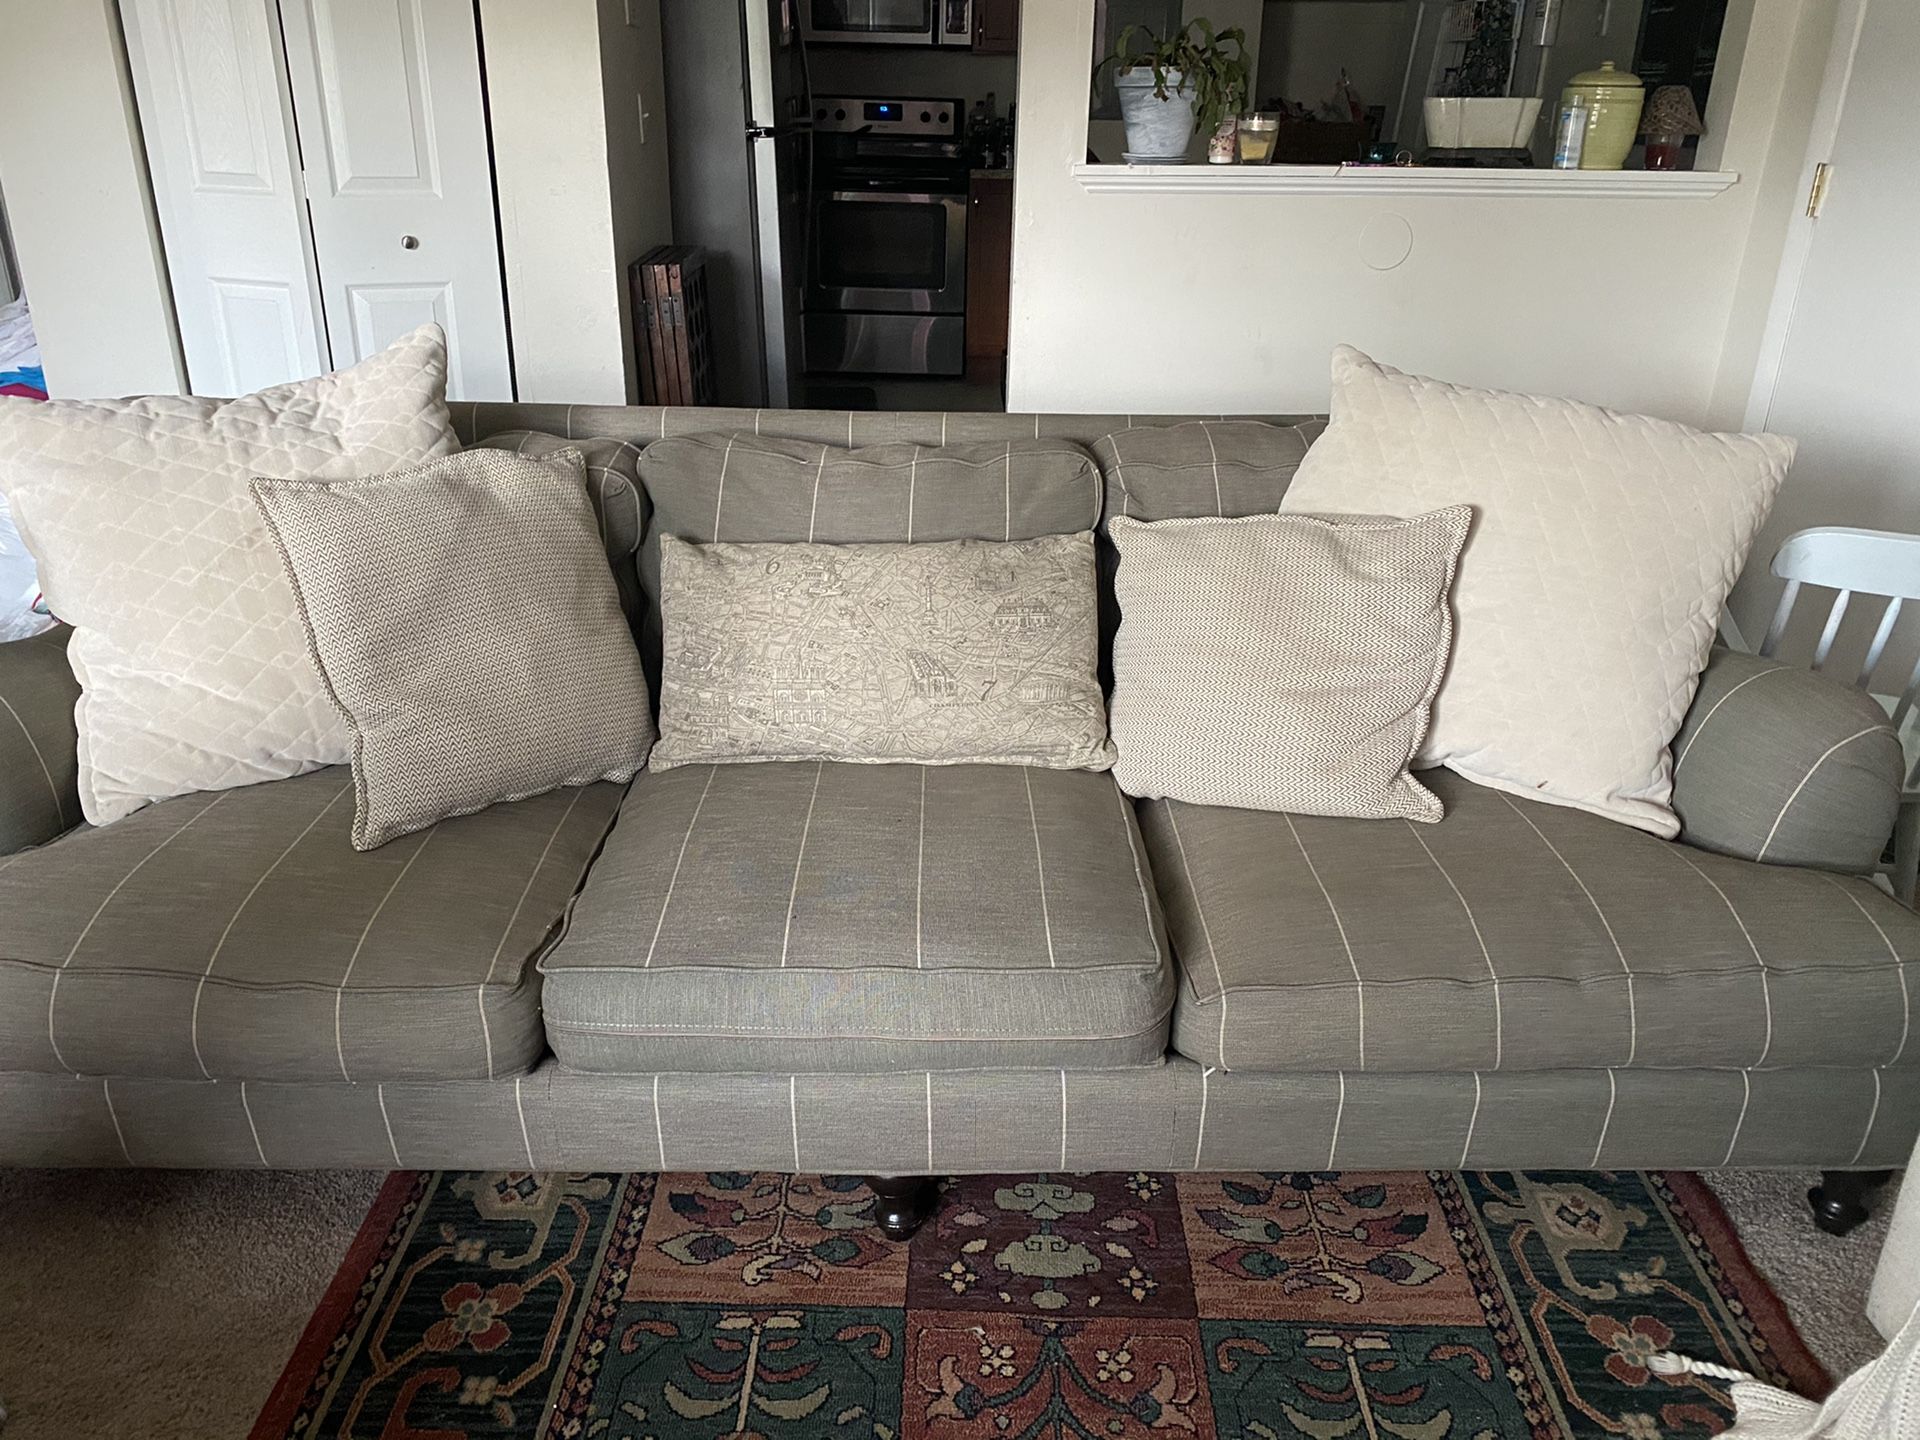 Sofa, couch, chair